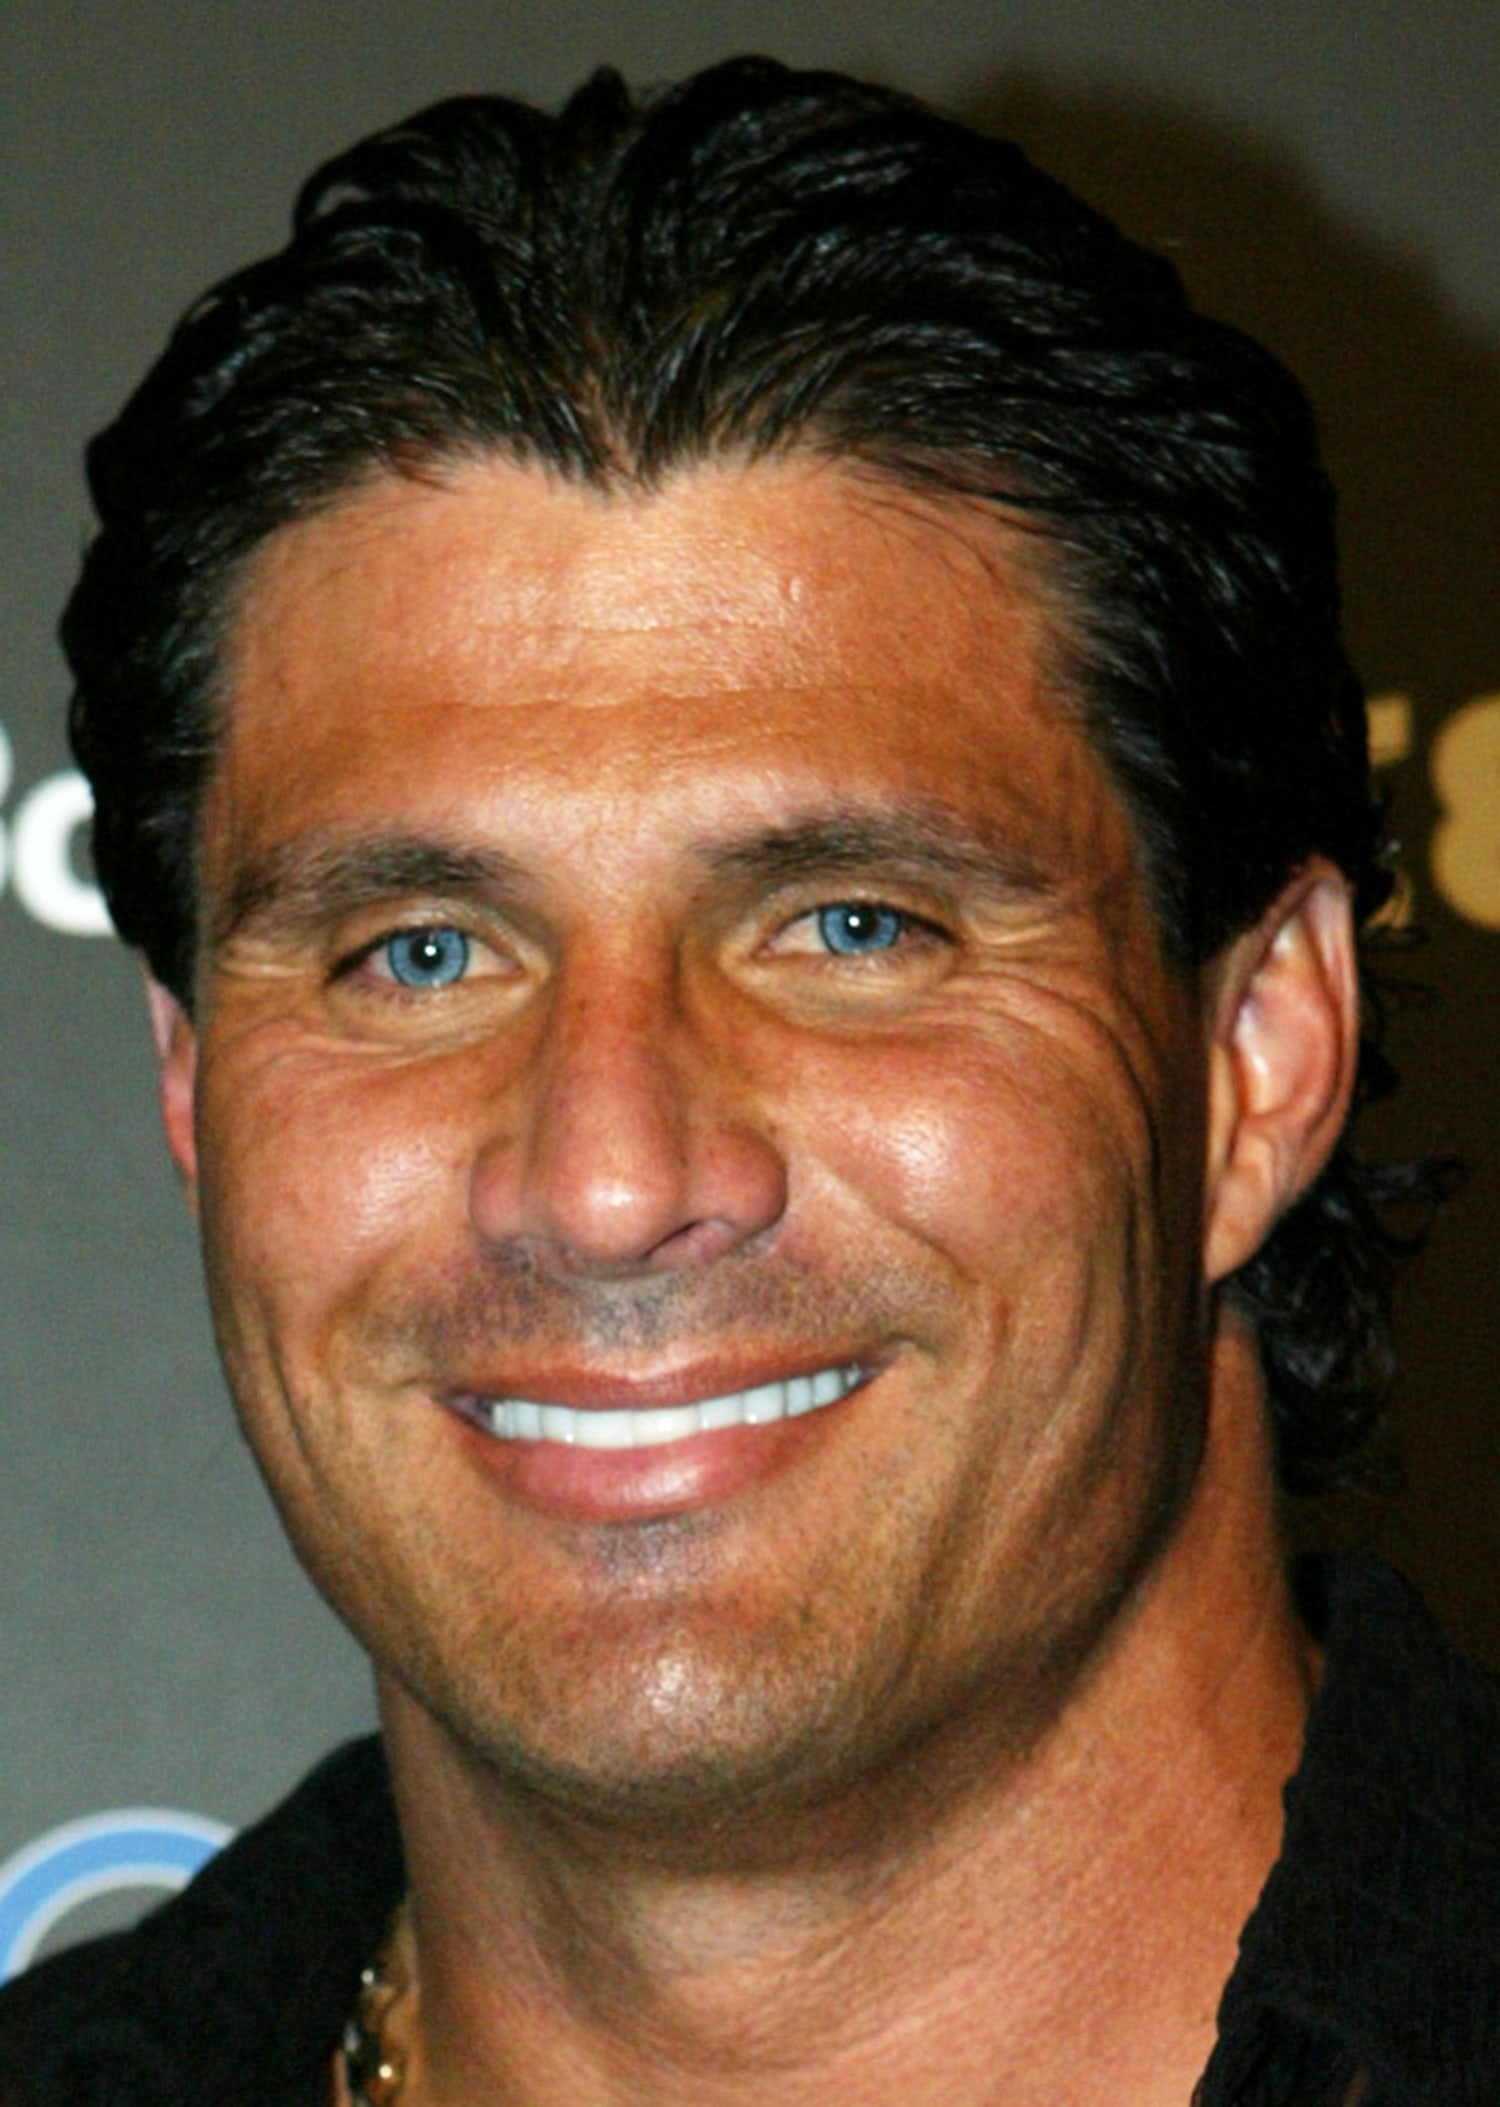 When Jose Canseco's steroid-tainted body transformation ignited a